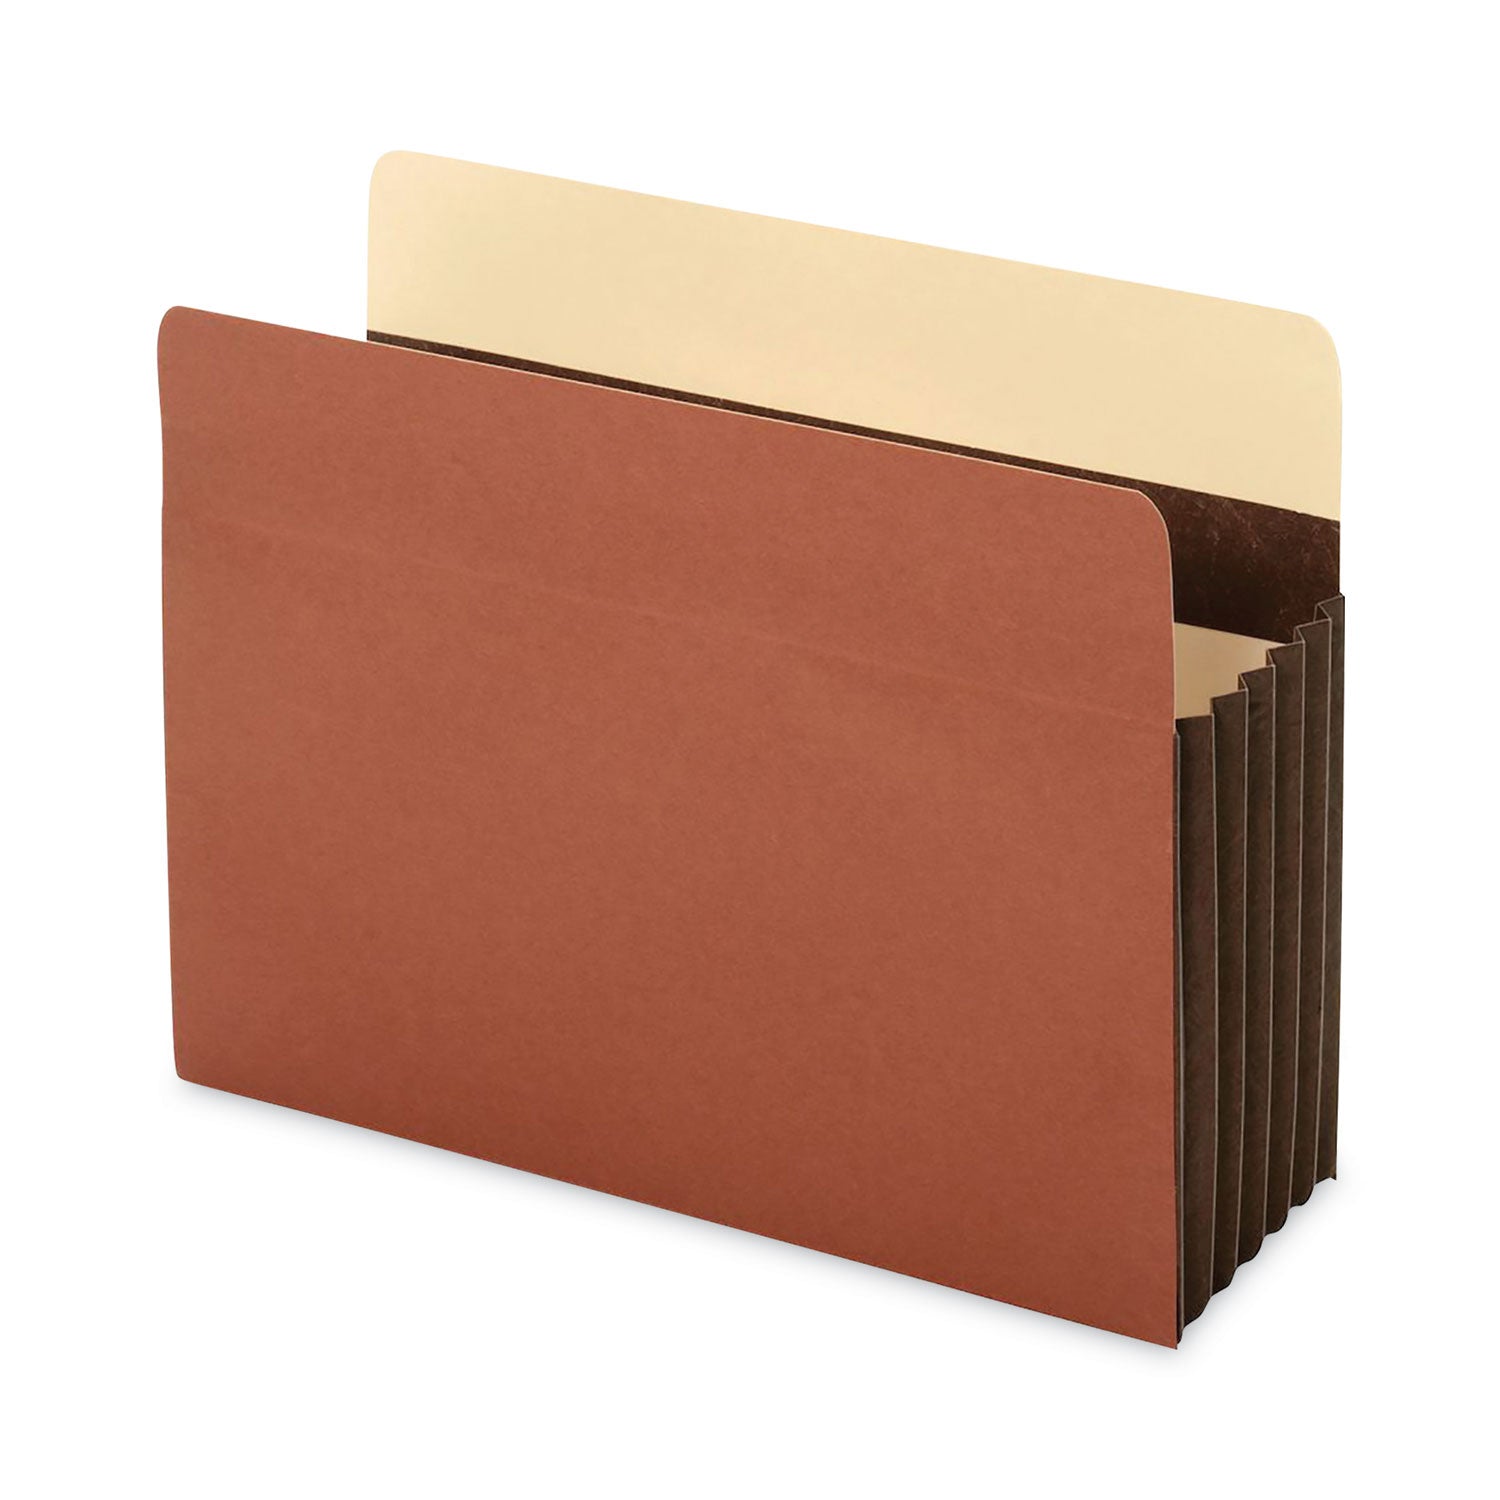 redrope-expanding-file-pockets-7-expansion-letter-size-brown-5-box_unv17562 - 1